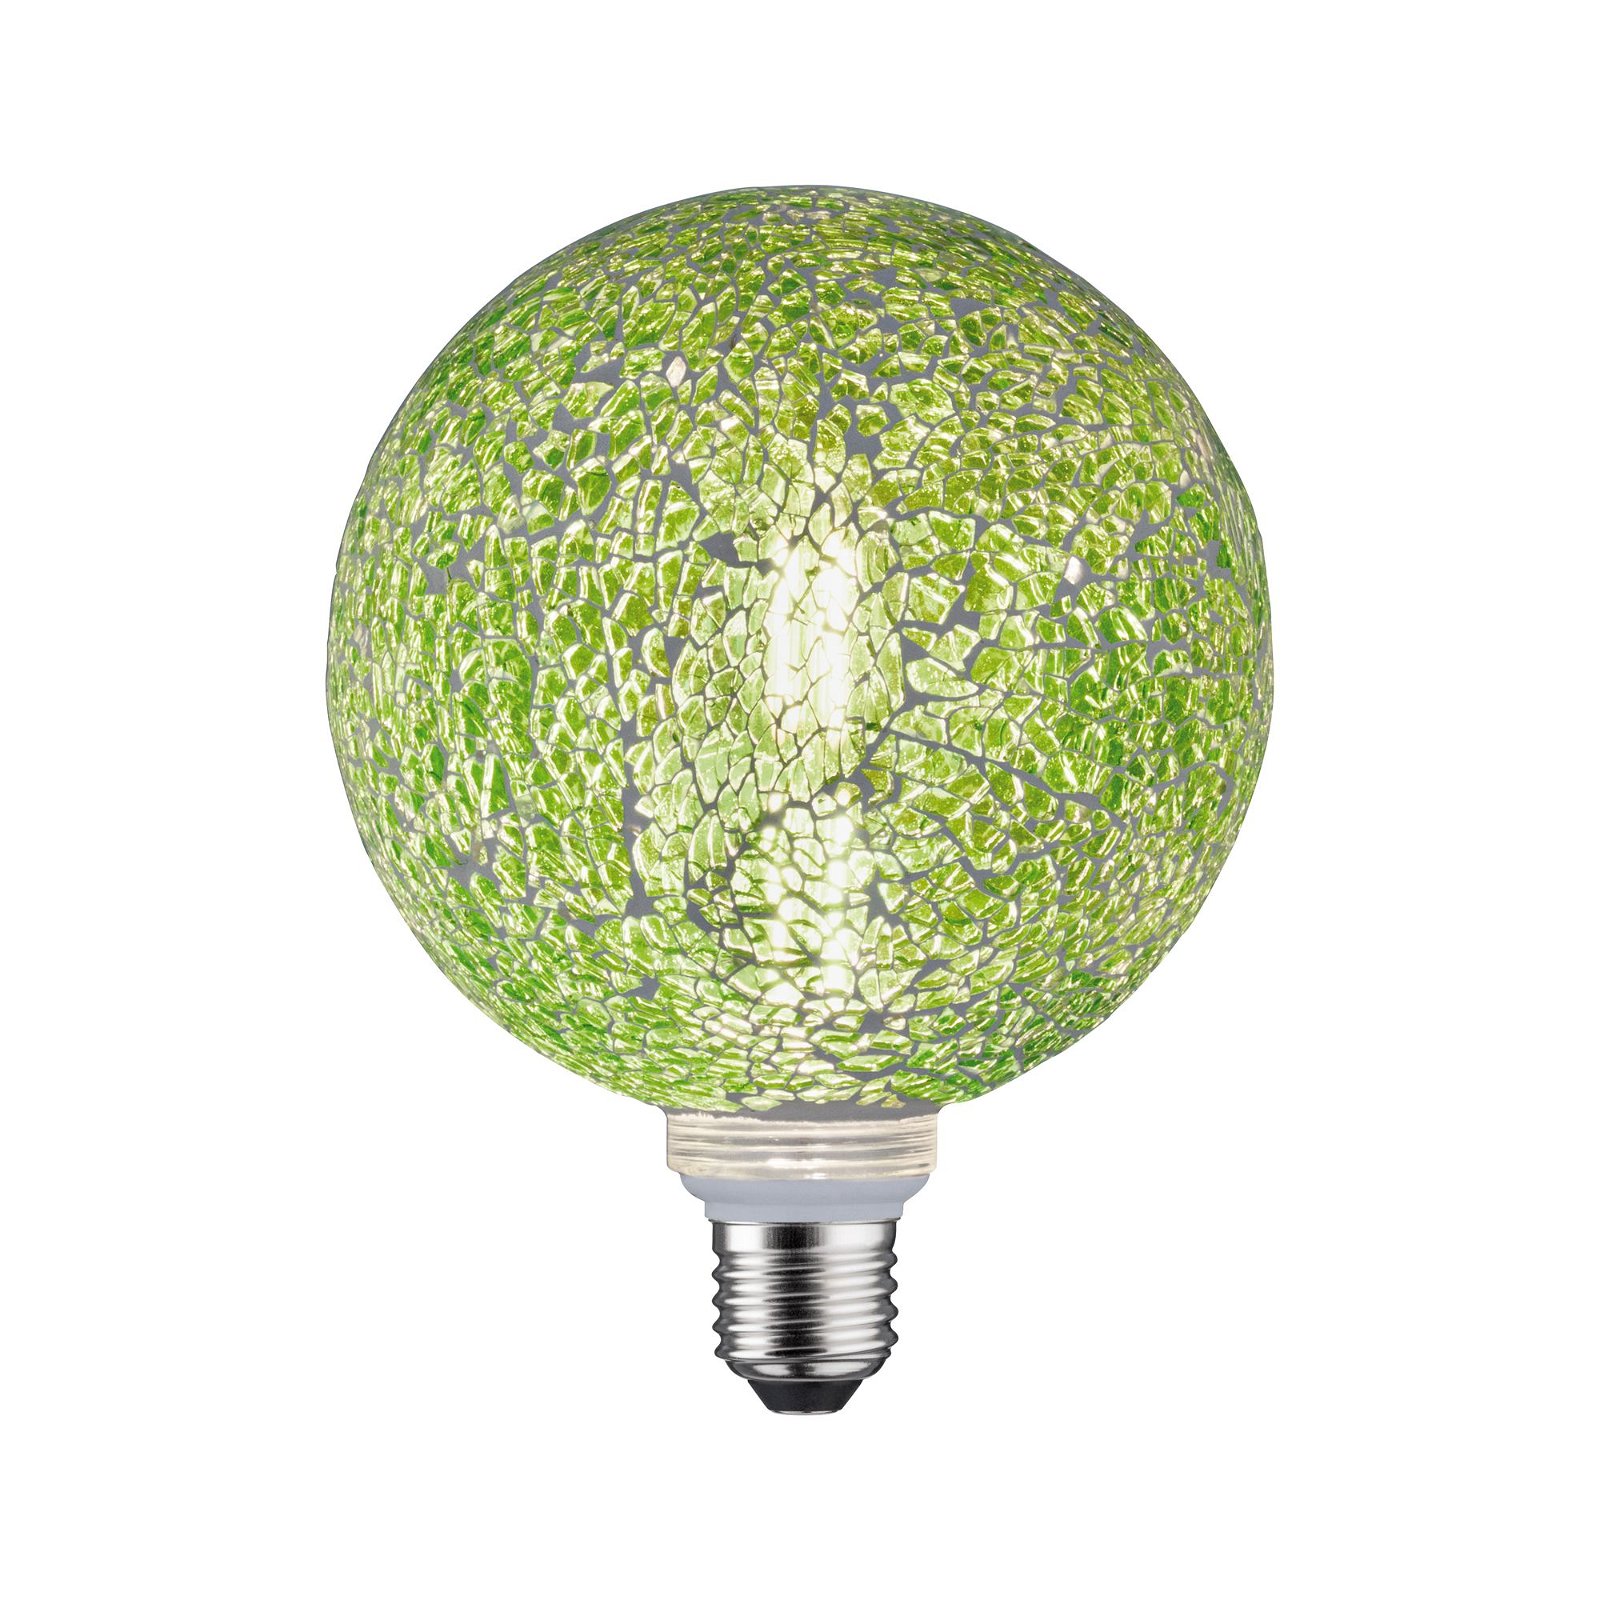 Miracle Mosaic Edition 230 V Standard LED Globe G125 E27 470lm 5W 2700K dimmable Green